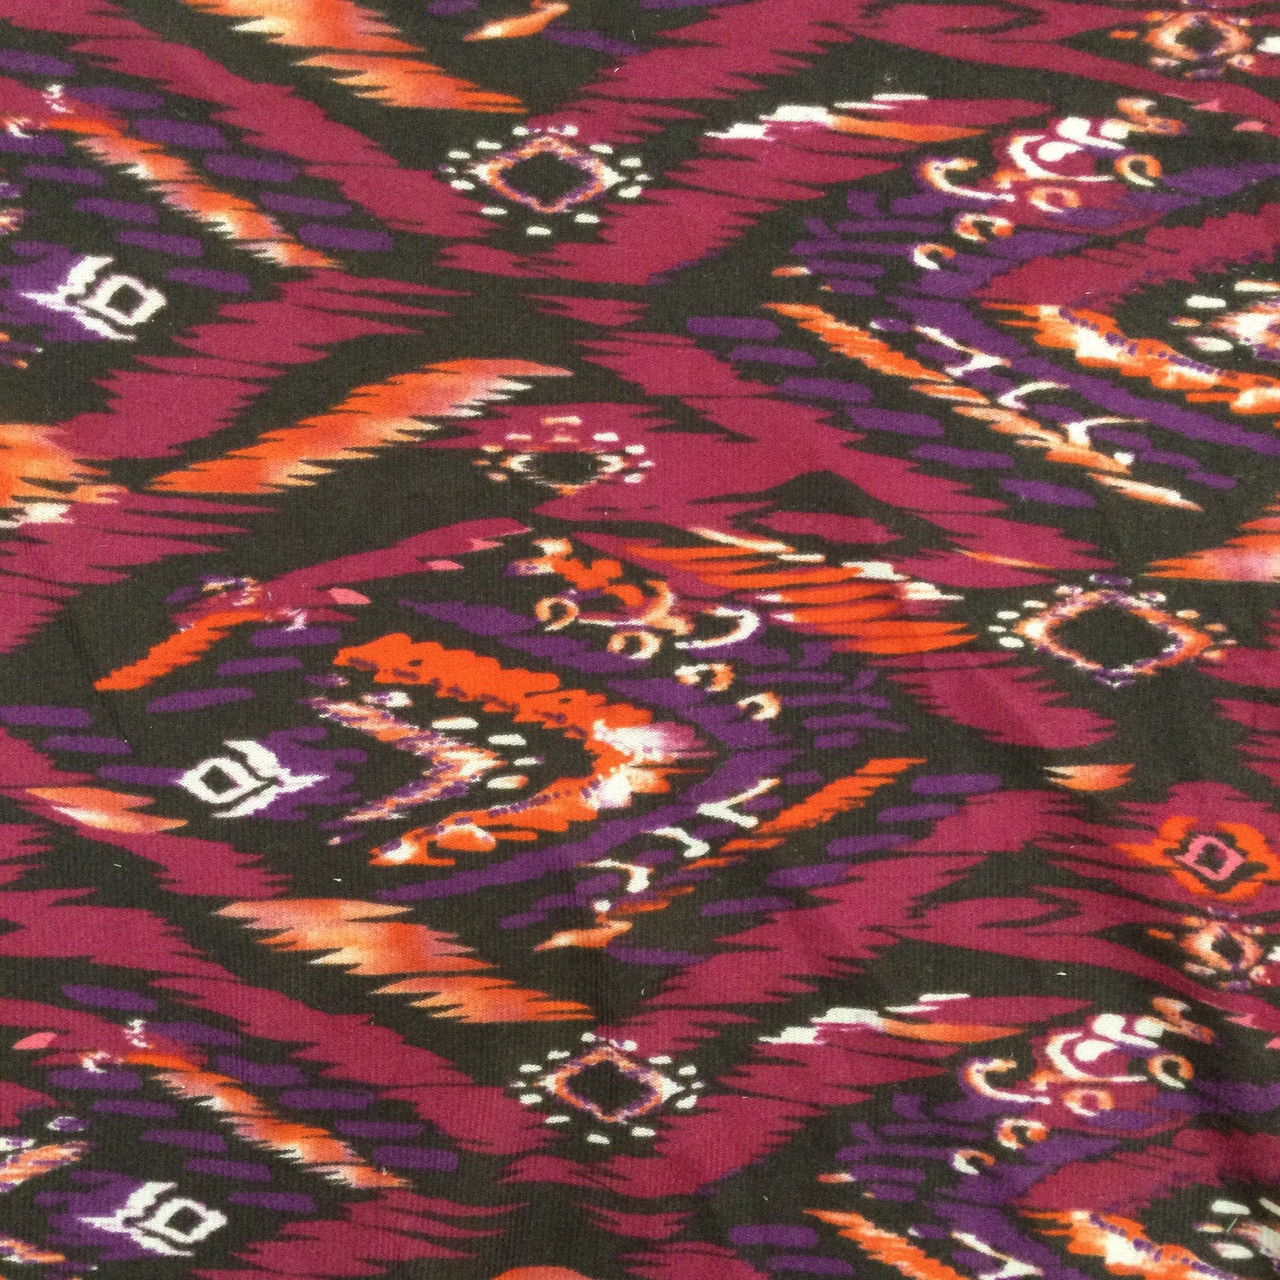 oneOone Cotton Flex Dark Magenta Fabric Tribal Abstract Sewing